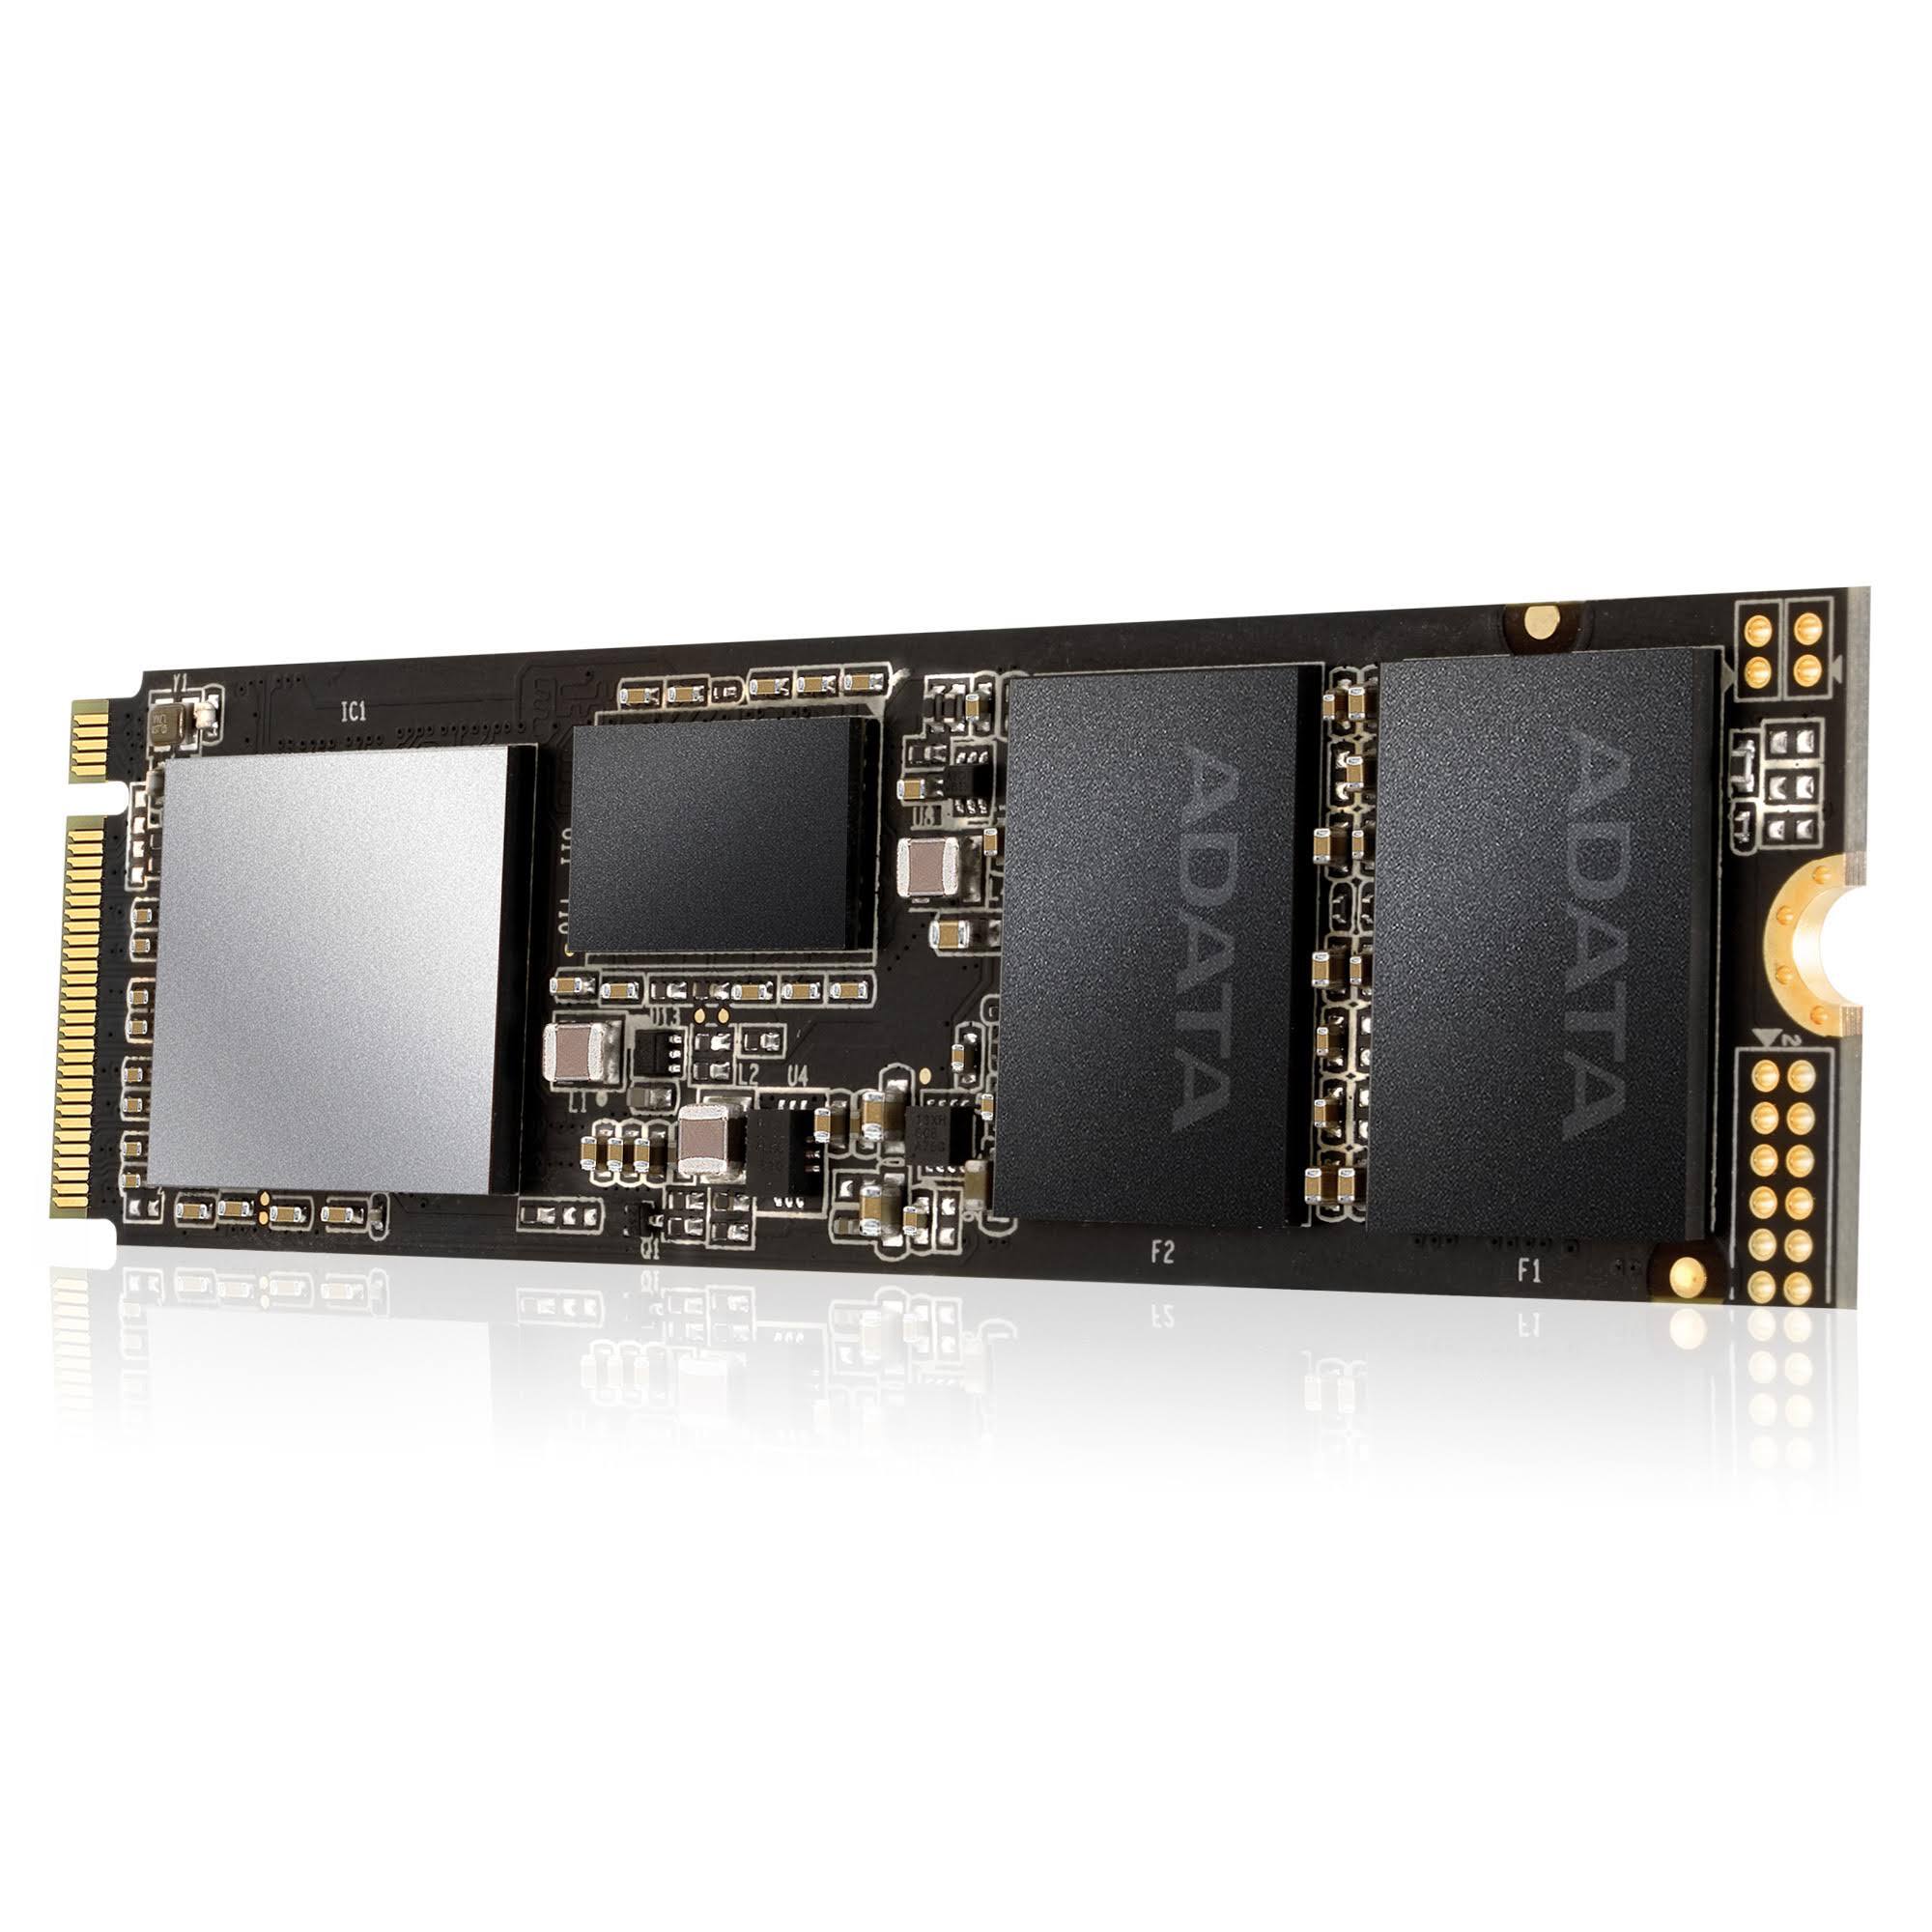 ADATA/XPG SSD's on sale at Best Buy starting from $109.99